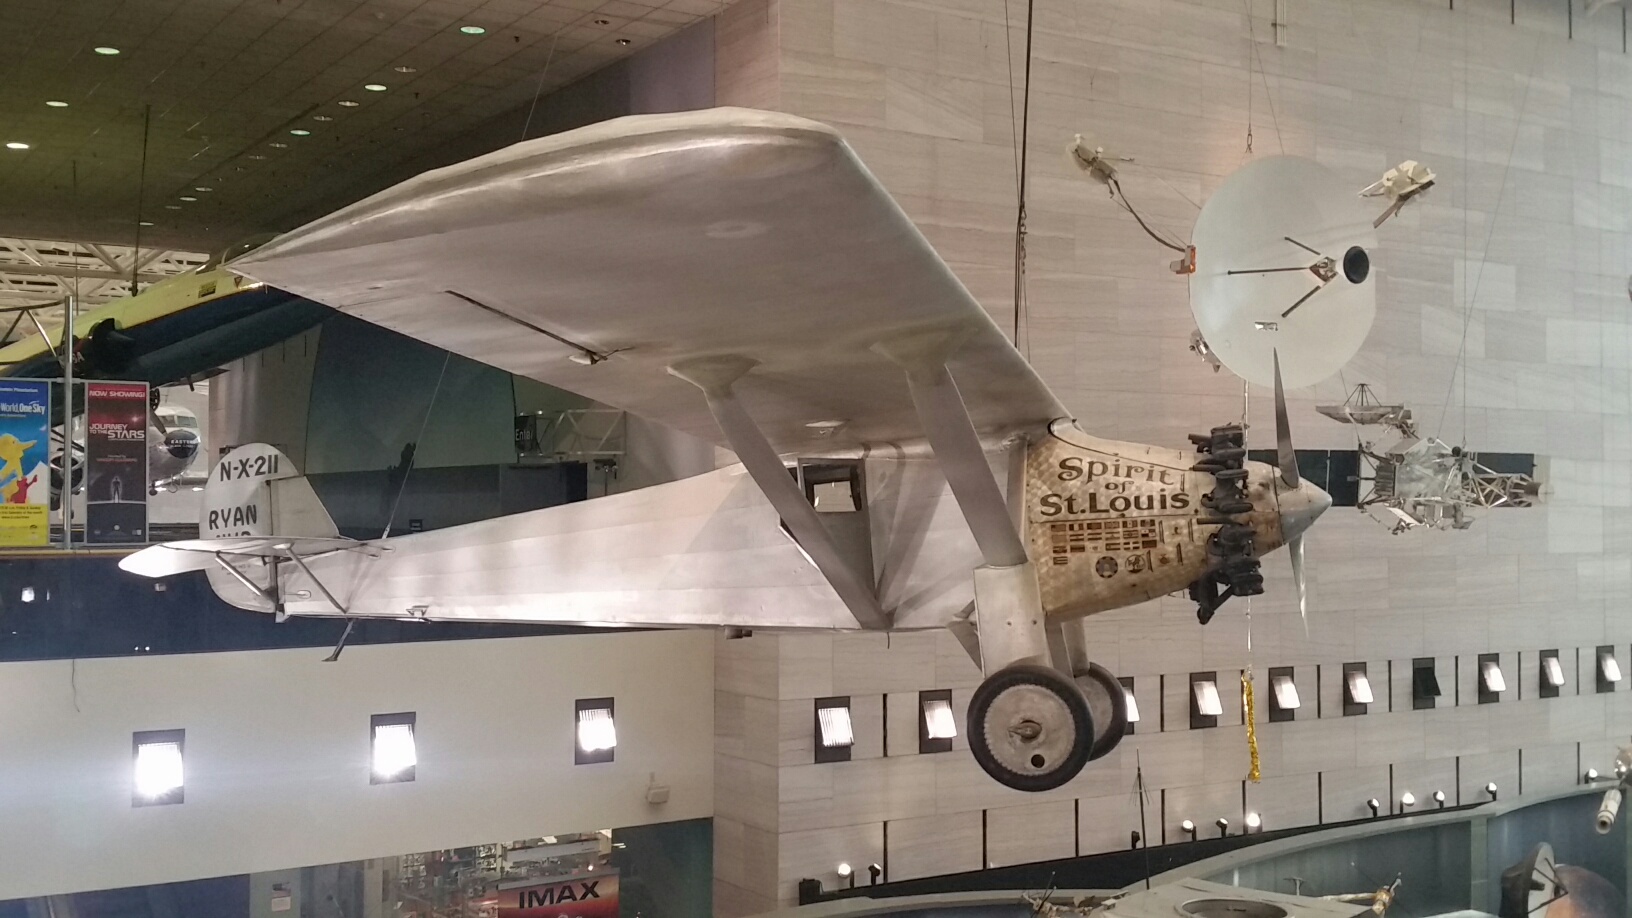 Other highlights in the Flight Hall include the renewed exhibit of Charles Lindbergh's Spirit of St. Louis, which he flew on a solo nonstop flight from New York to Paris in 1927.  (WTOP/Kathy Stewart)